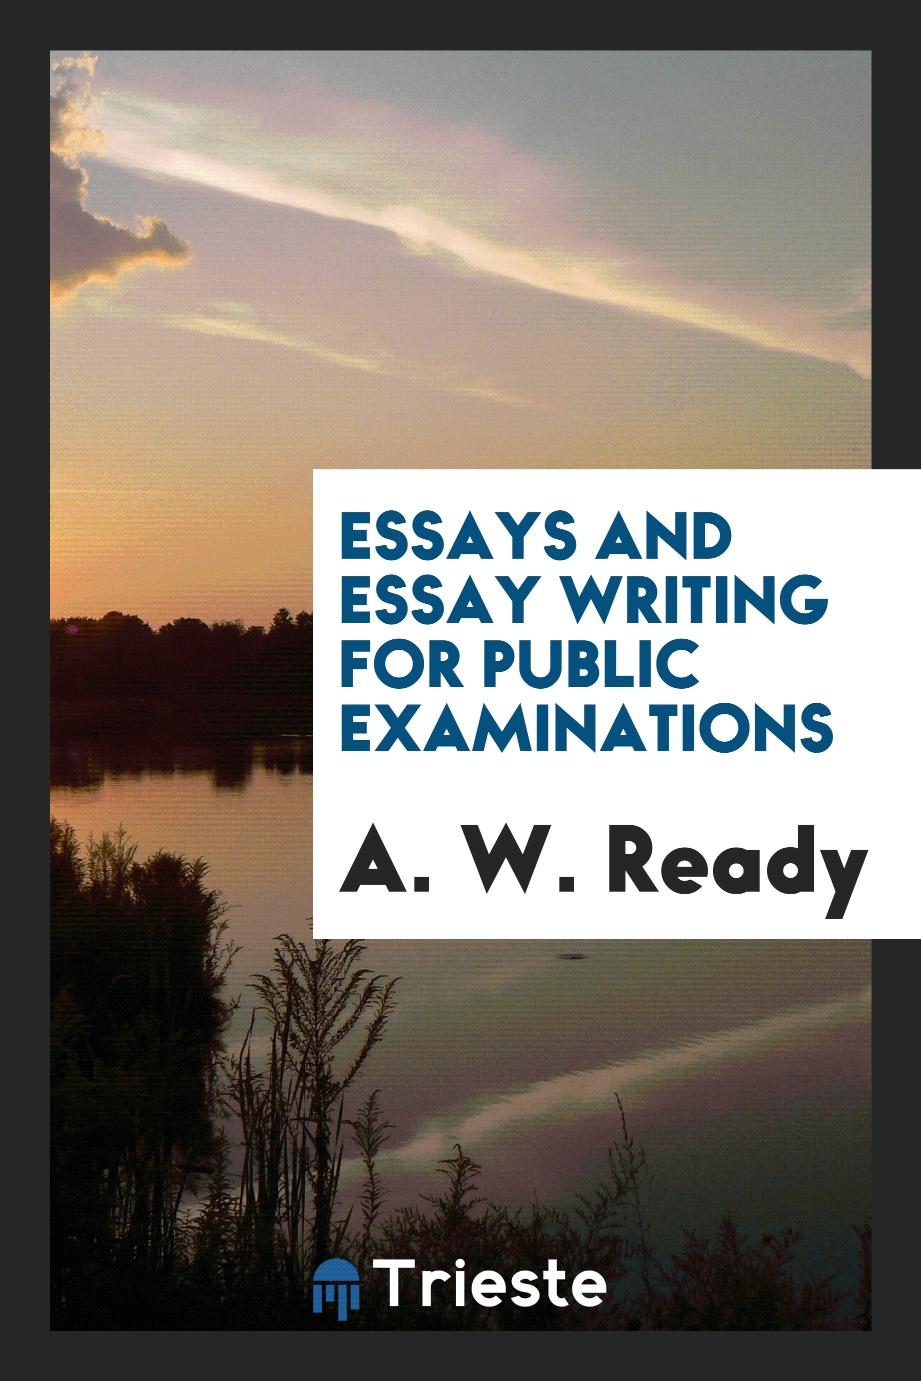 A. W. Ready - Essays and Essay Writing for Public Examinations